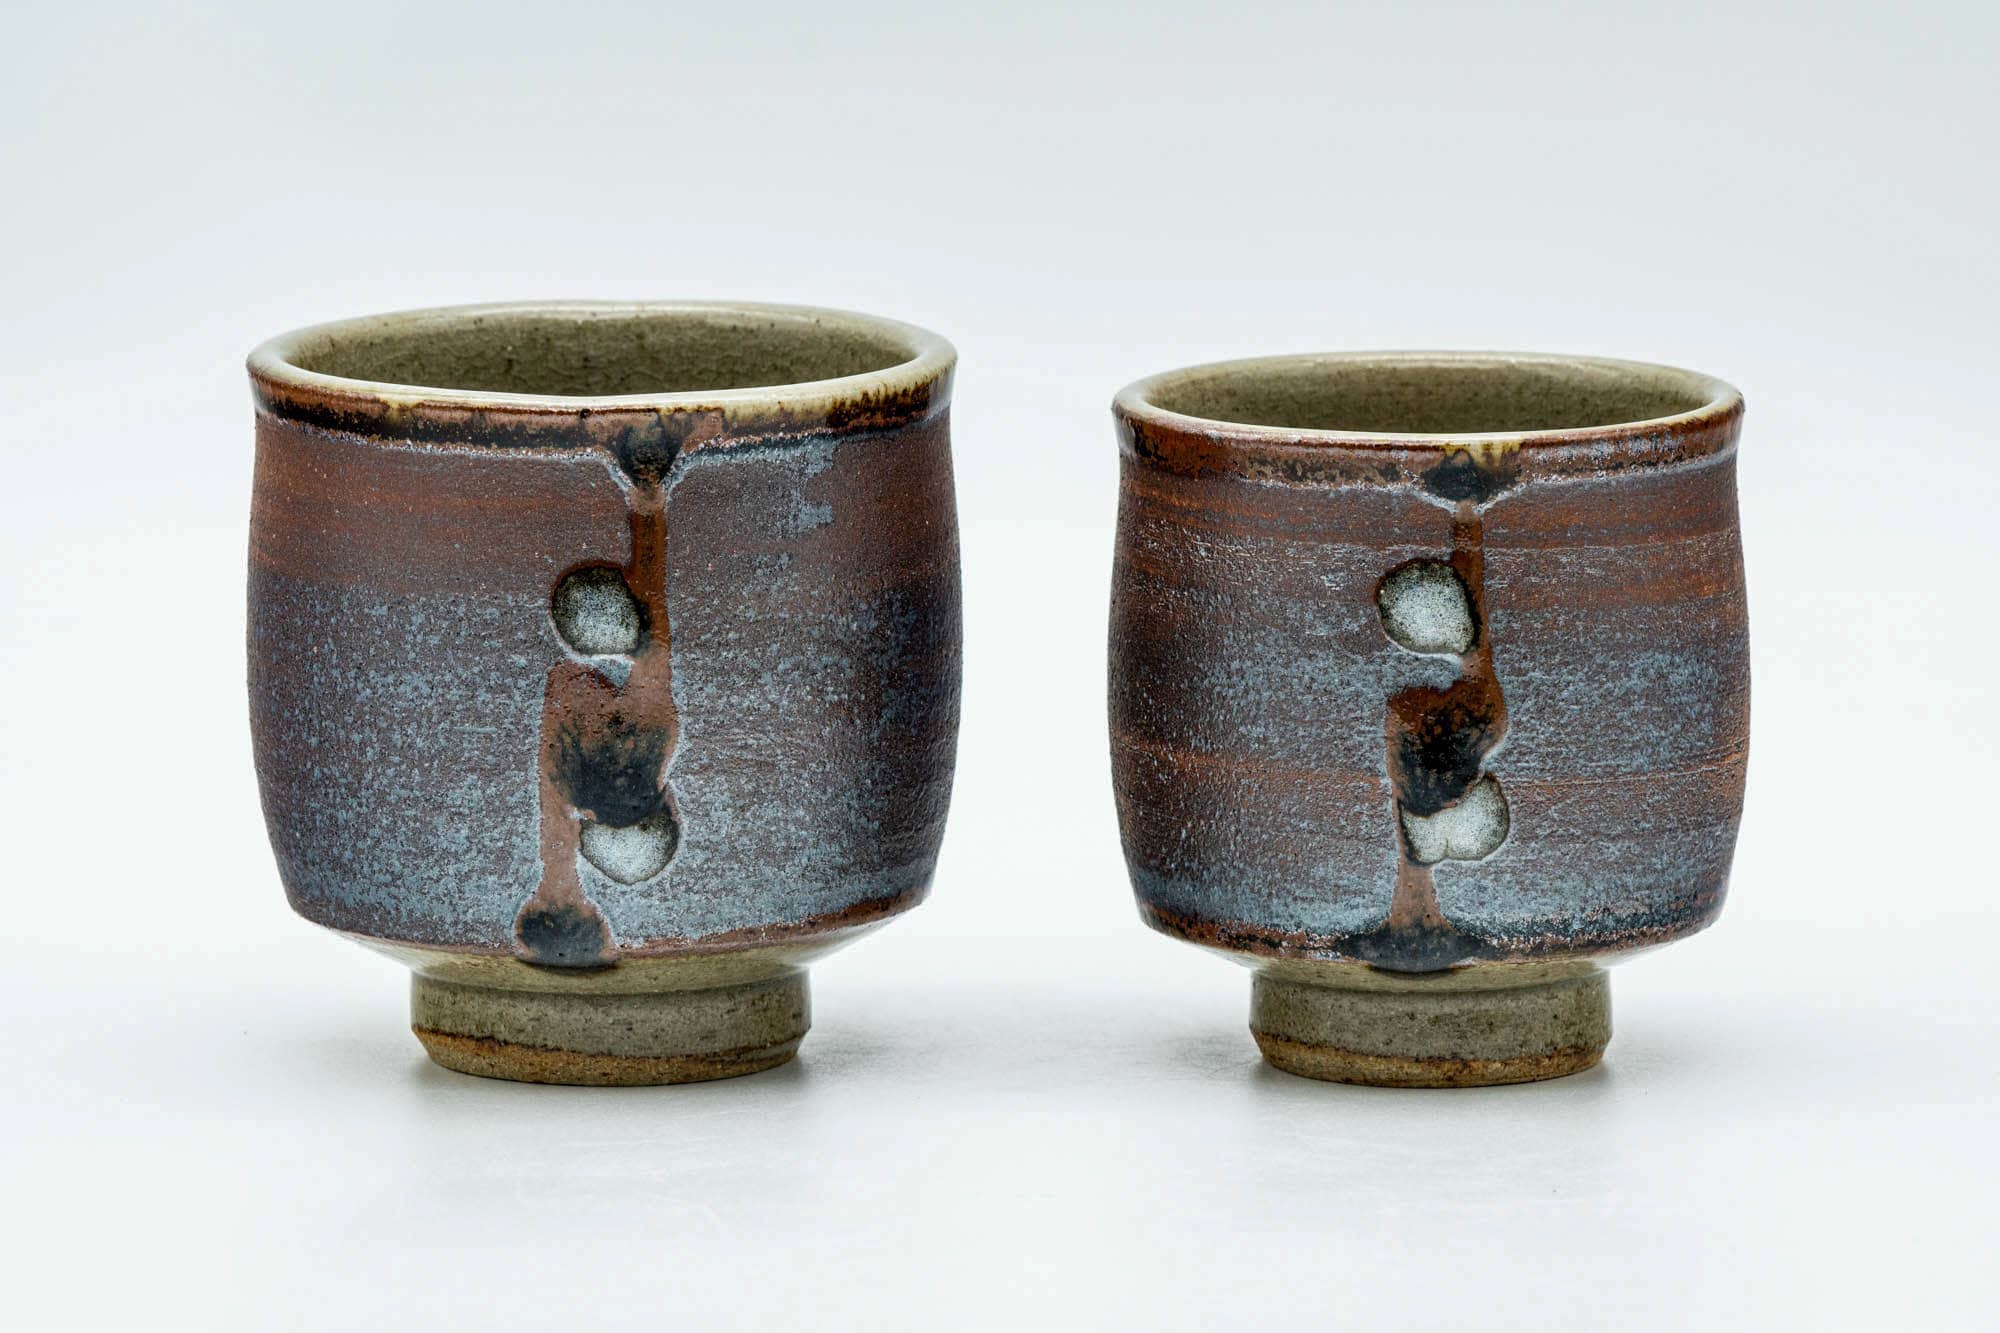 Japanese Teacups - Pair of Large Drip-Glazed Meoto Yunomi in Wooden Box